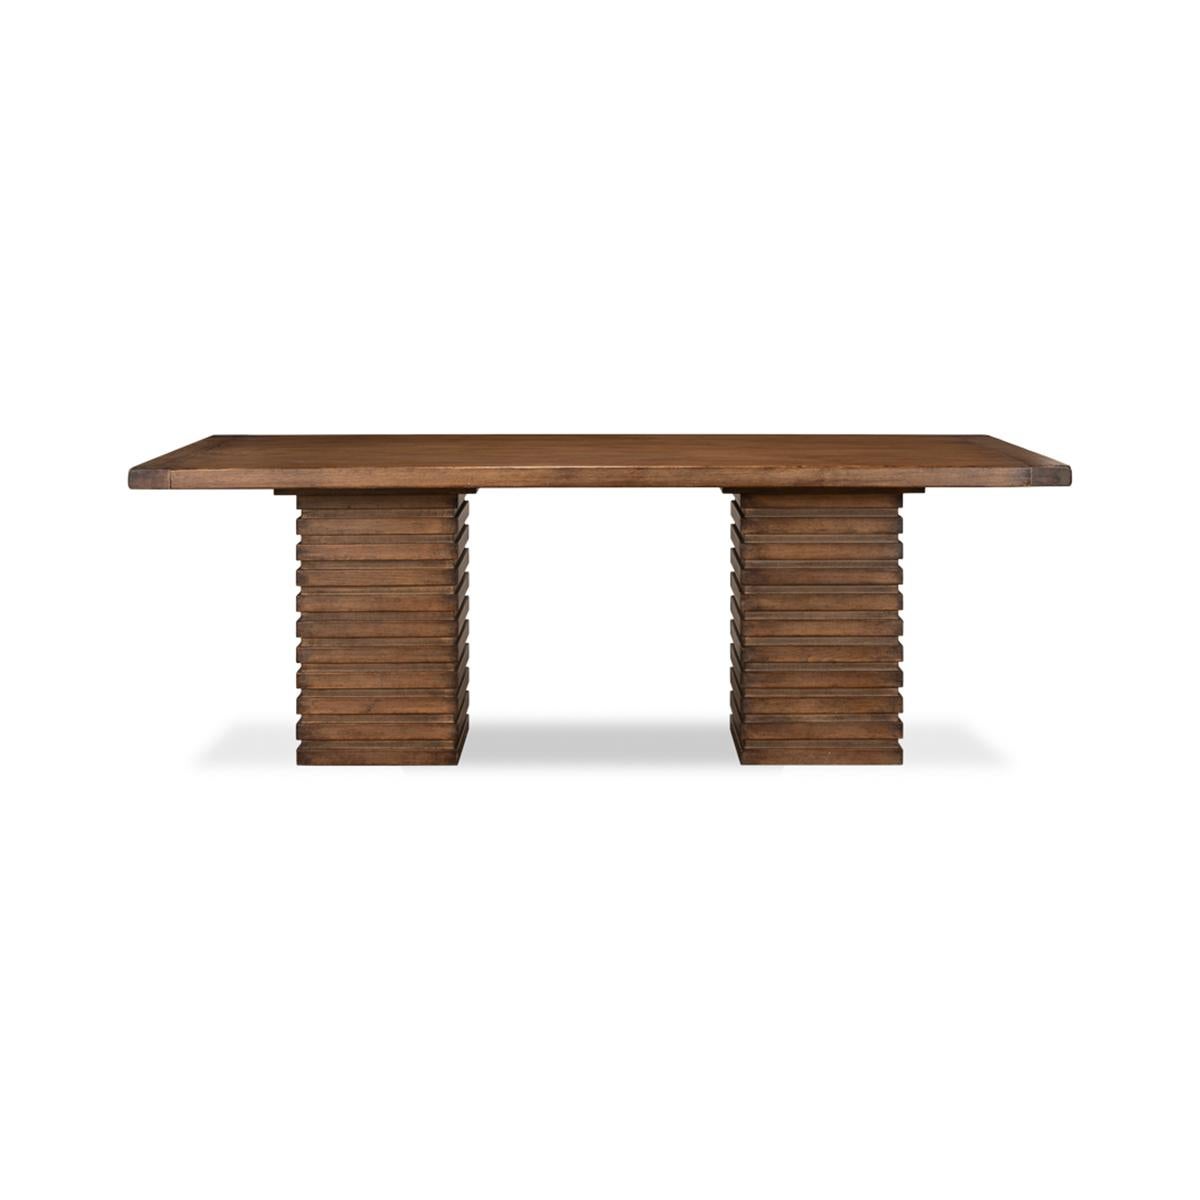 Stacked Modern dining table is made of pine with a mahogany stain finish. The breadboard top sits on twin column pedestals with a modern geometrically stacked design.

Dimensions: 87